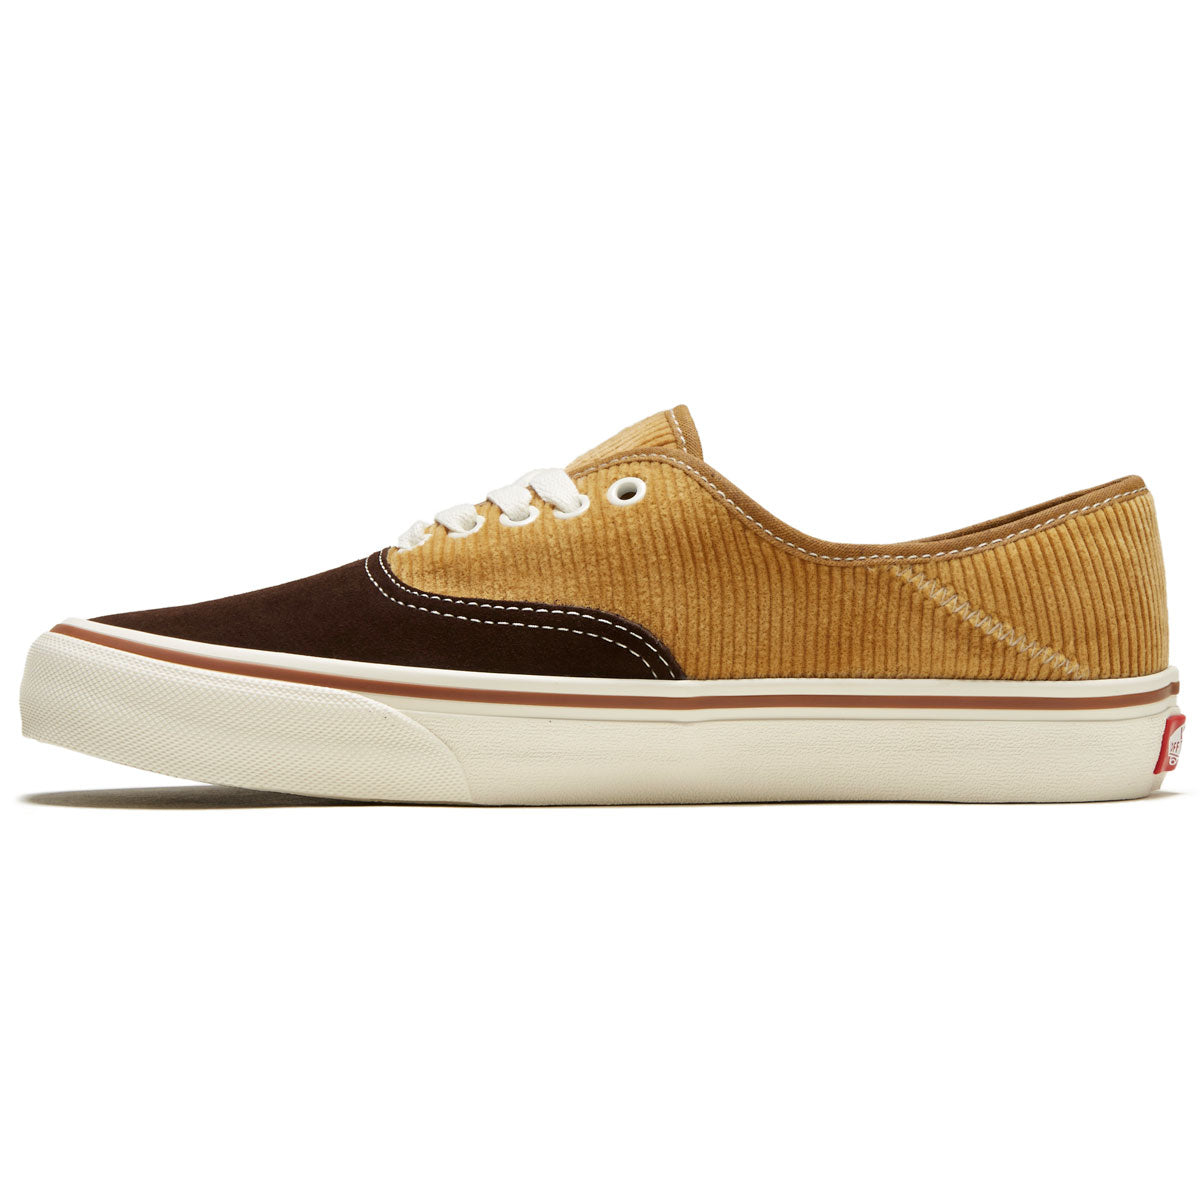 Vans Authentic VR3 Sf Shoes - Mustard Gold image 2